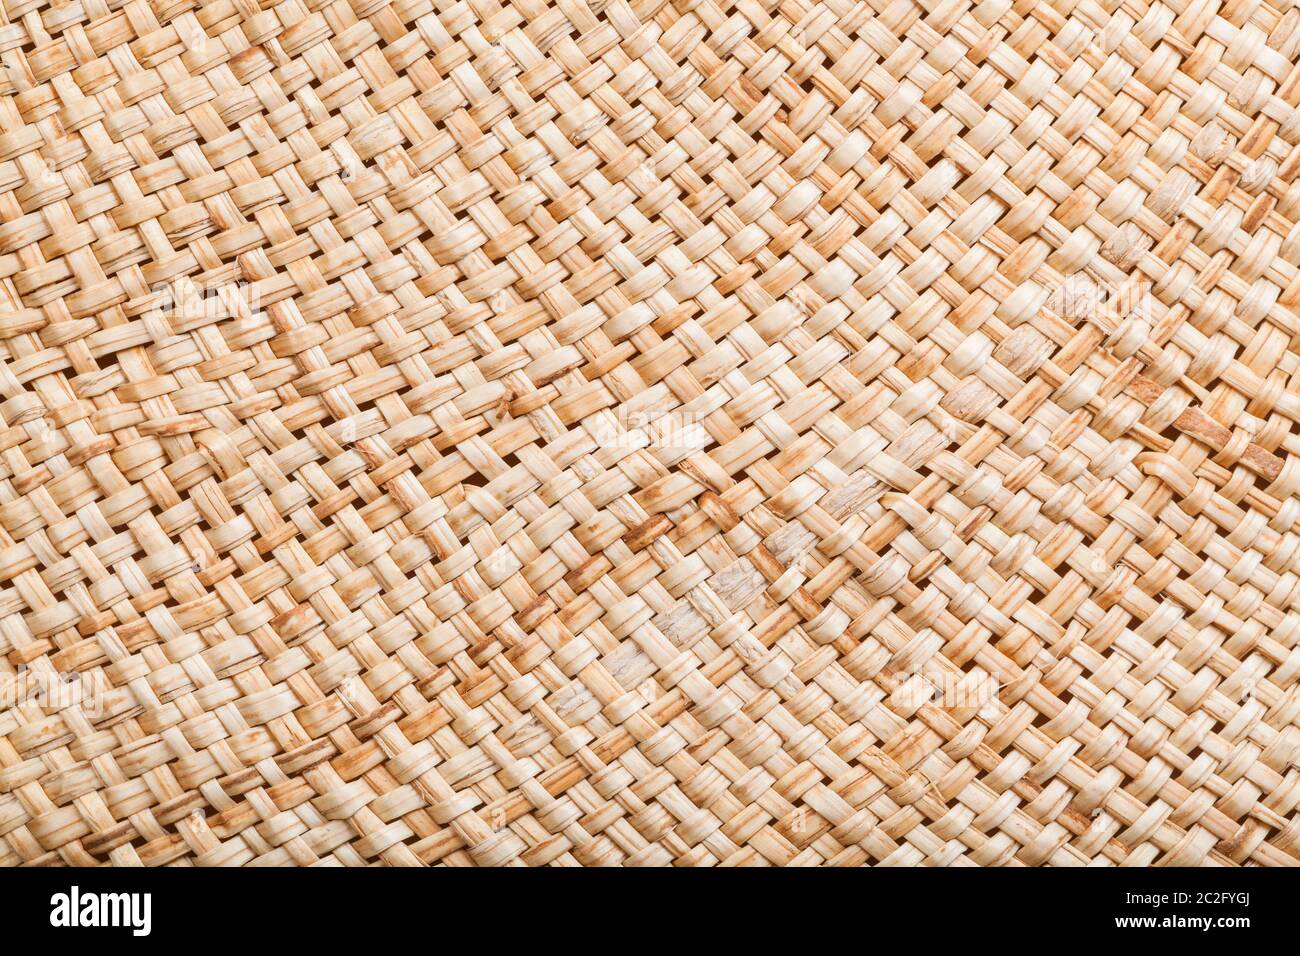 textile background - texture of summer straw hat from natural raffia fibers close up Stock Photo